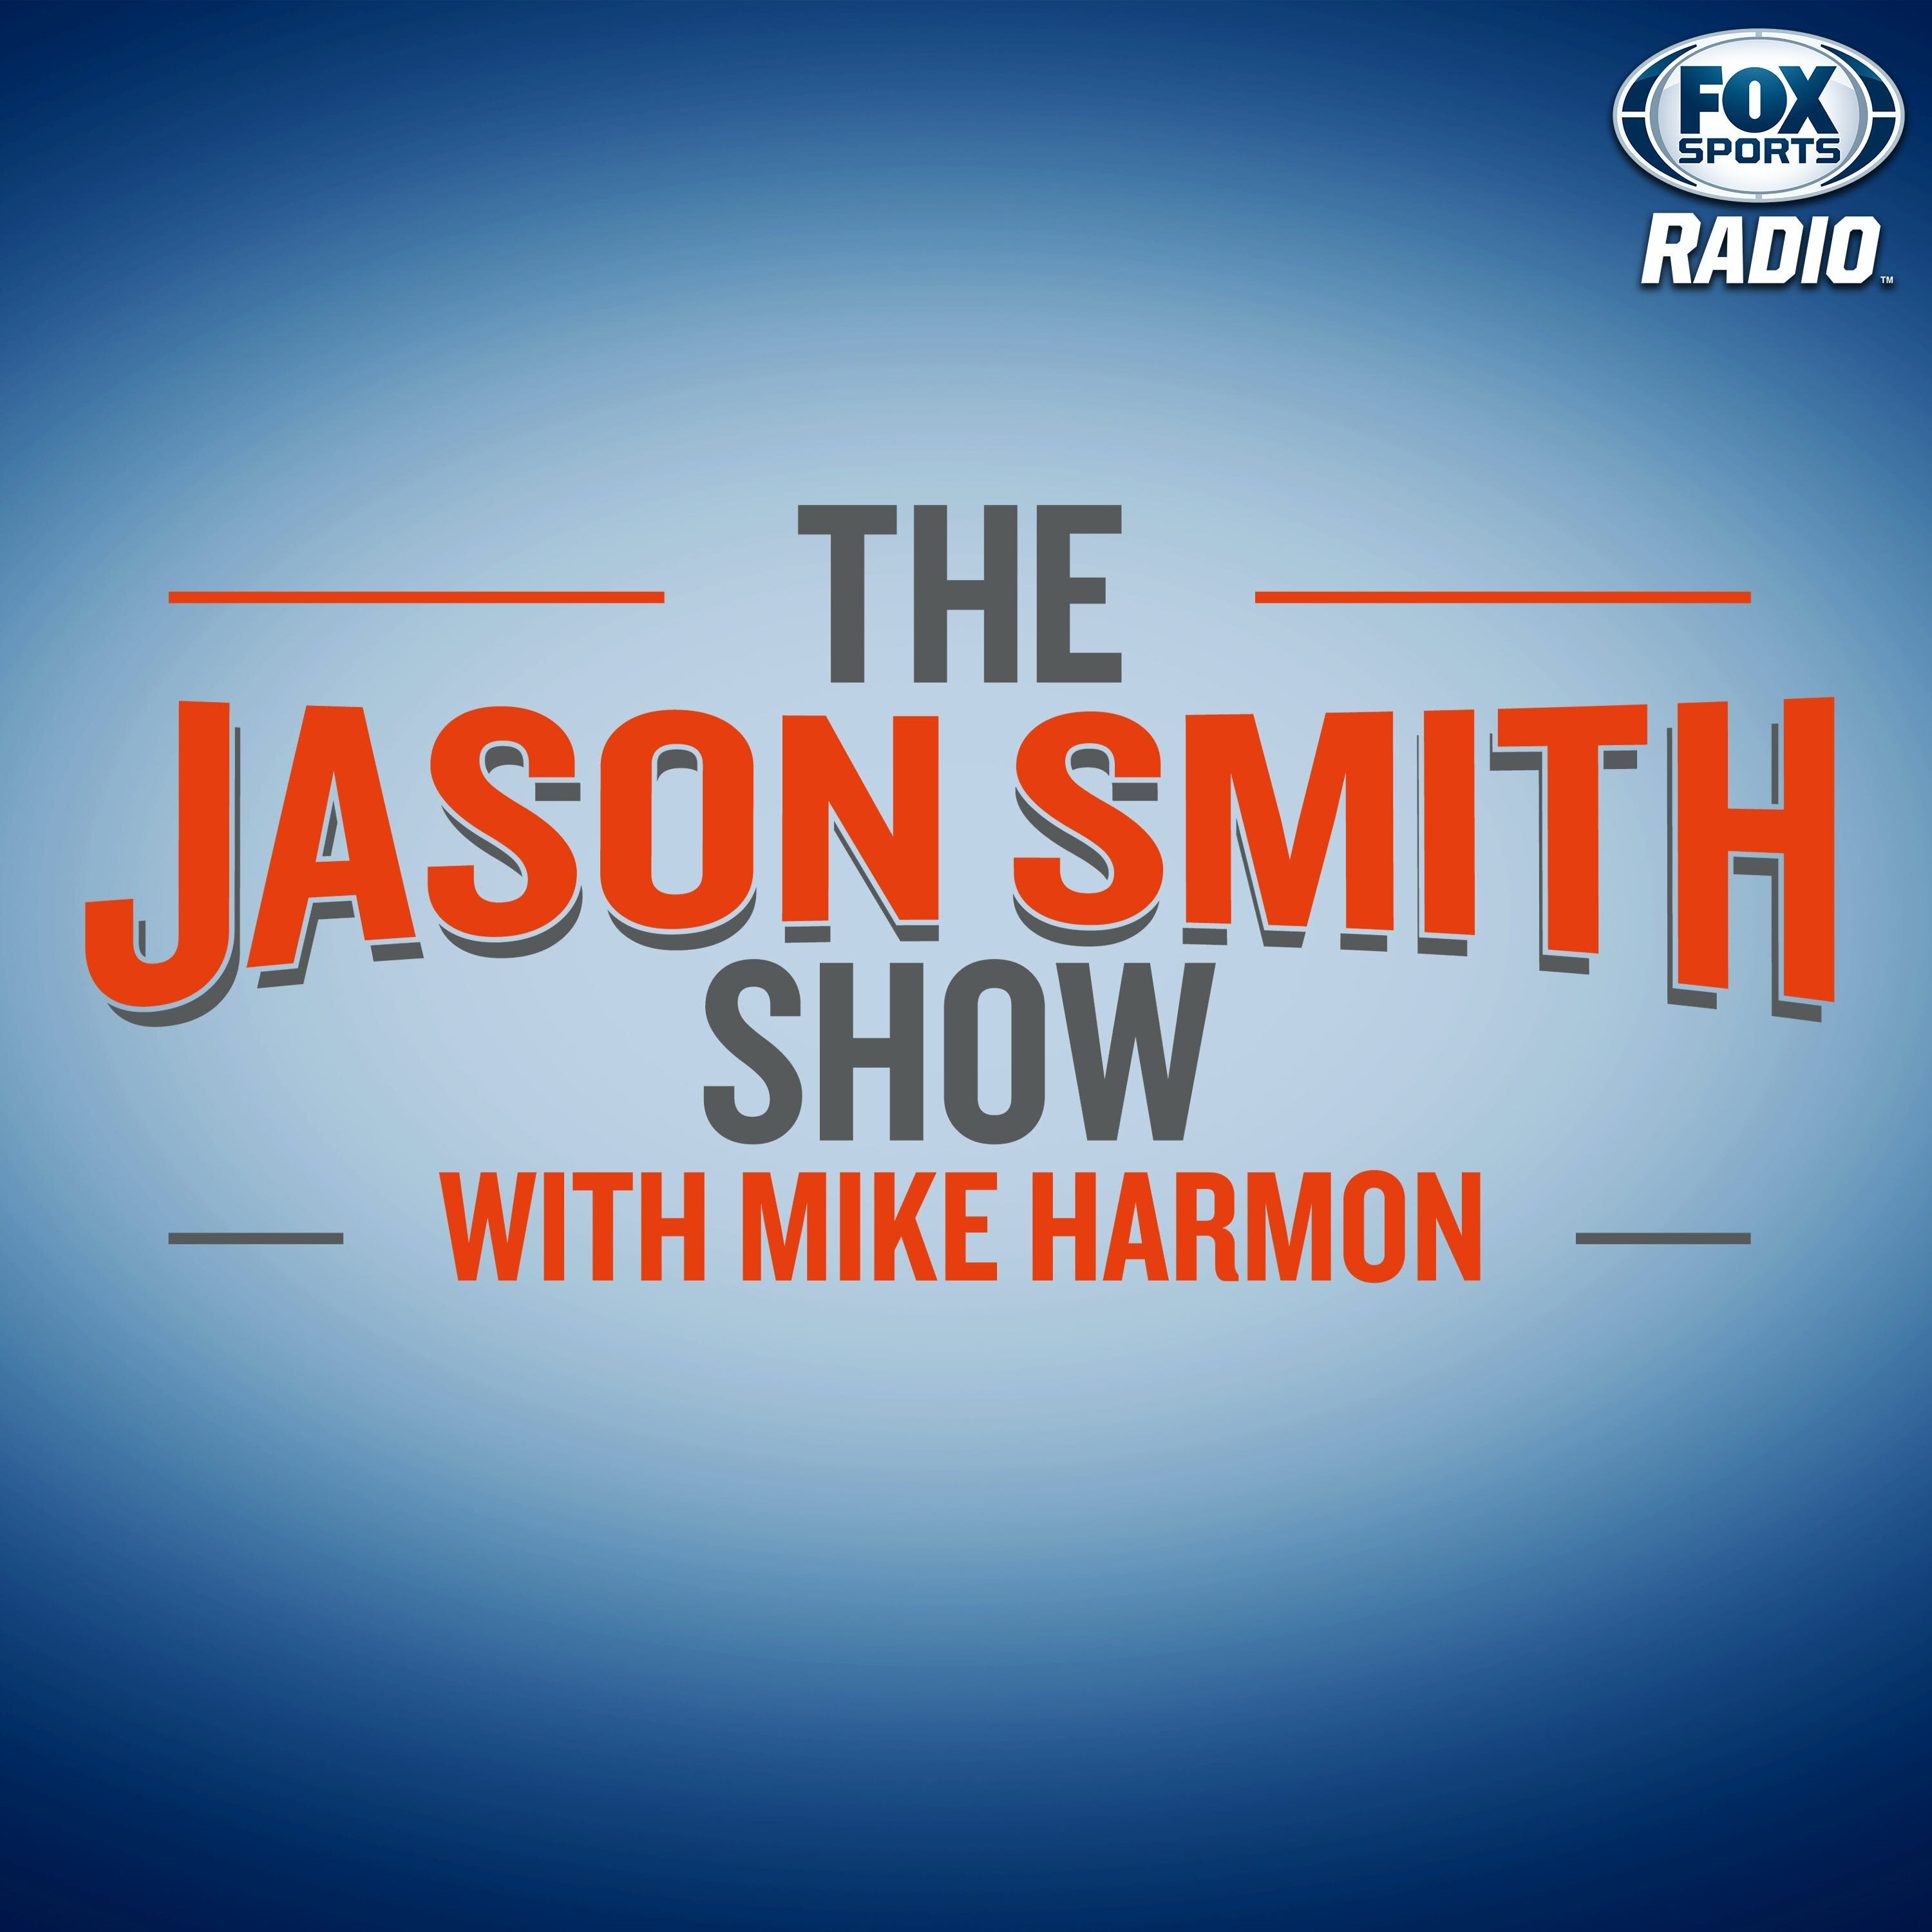 The Jason Smith Show with Mike Harmon